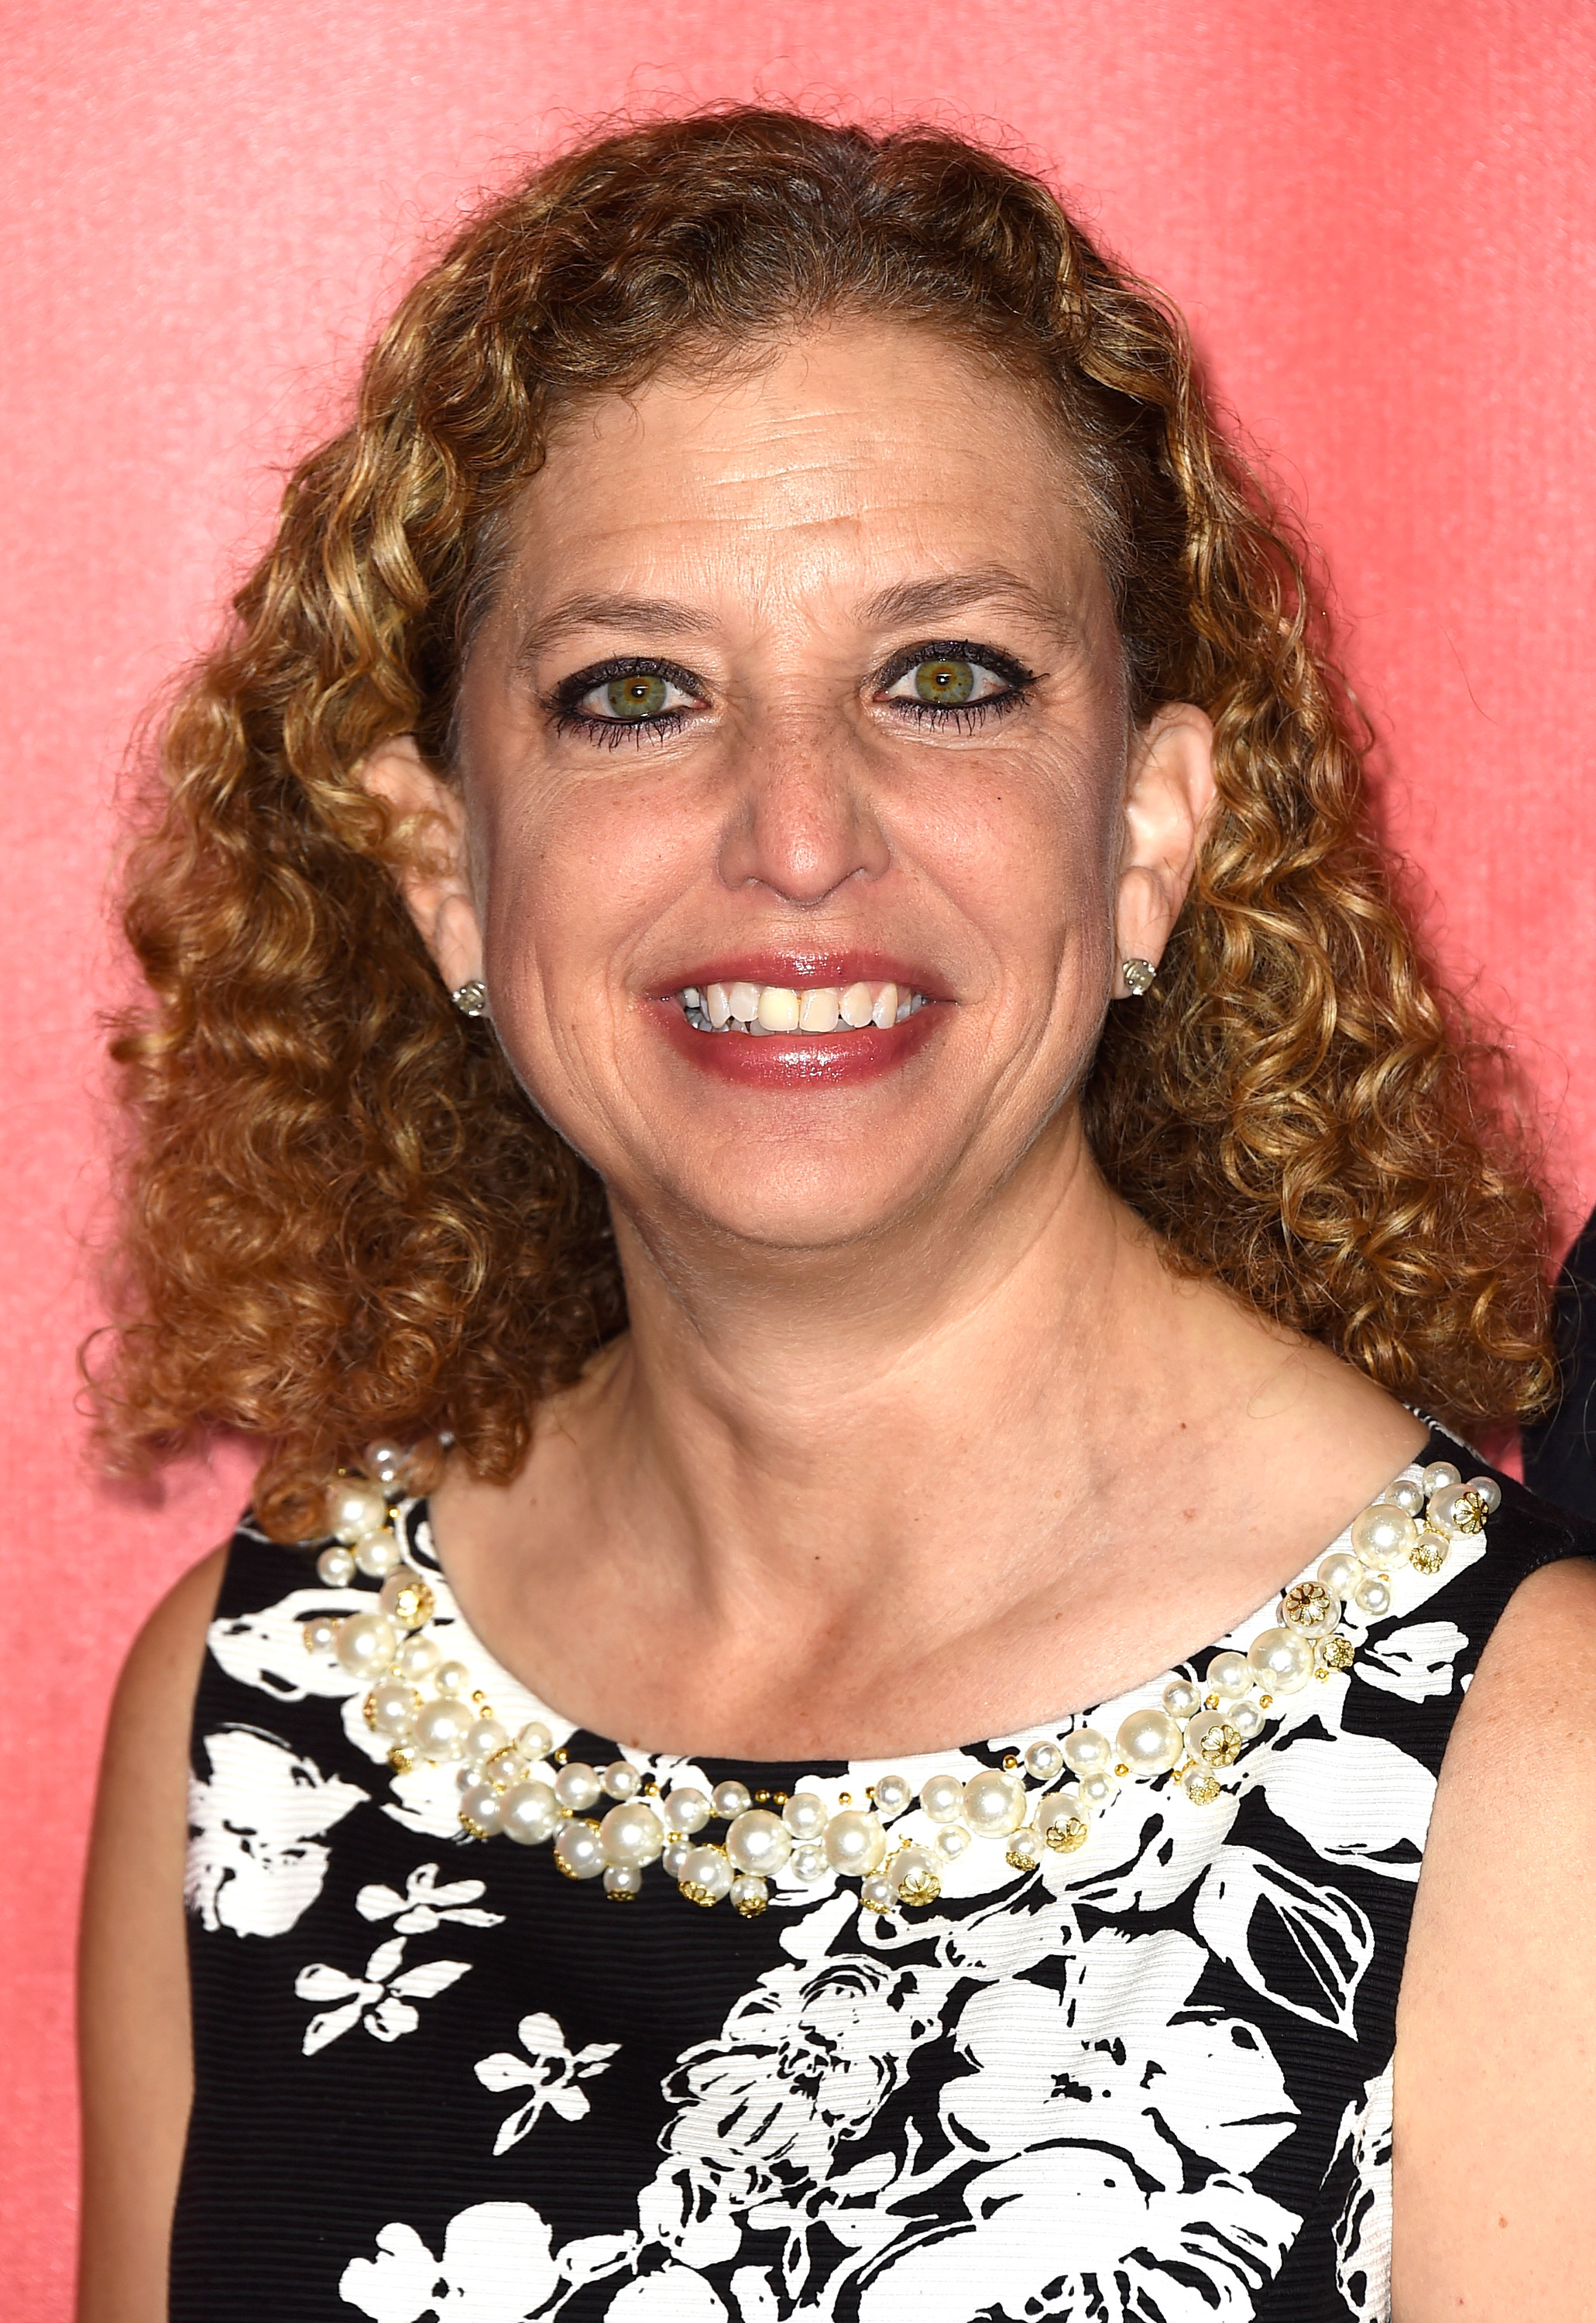 Congresswoman Debbie Wasserman Schultz at the 25th anniversary MusiCares 2015 Person Of The Year Gala in Los Angeles on Feb. 6, 2015.